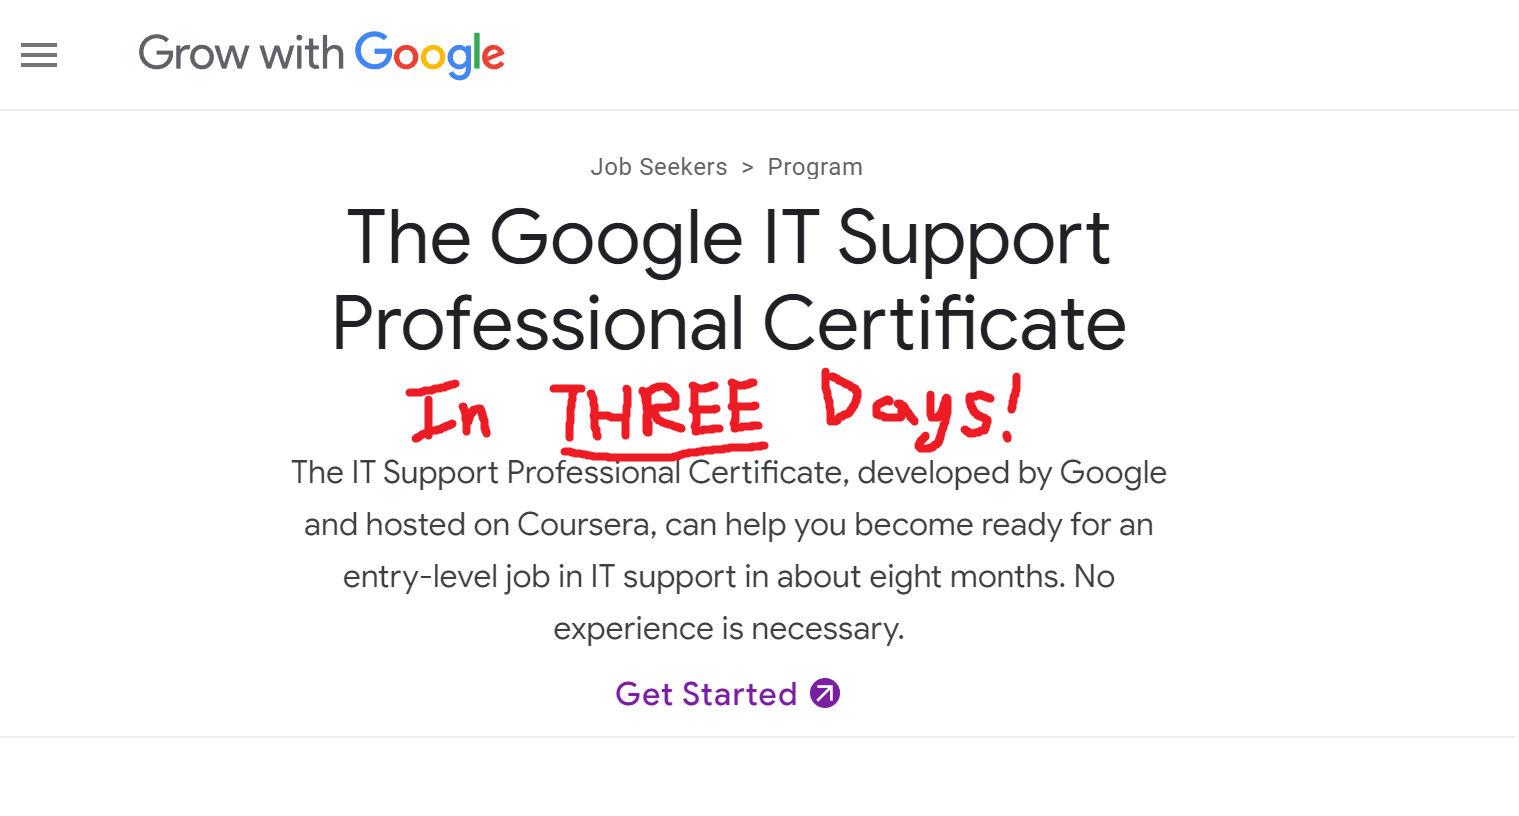 How I got the Google IT Support Professional Certificate in a little over 3 days